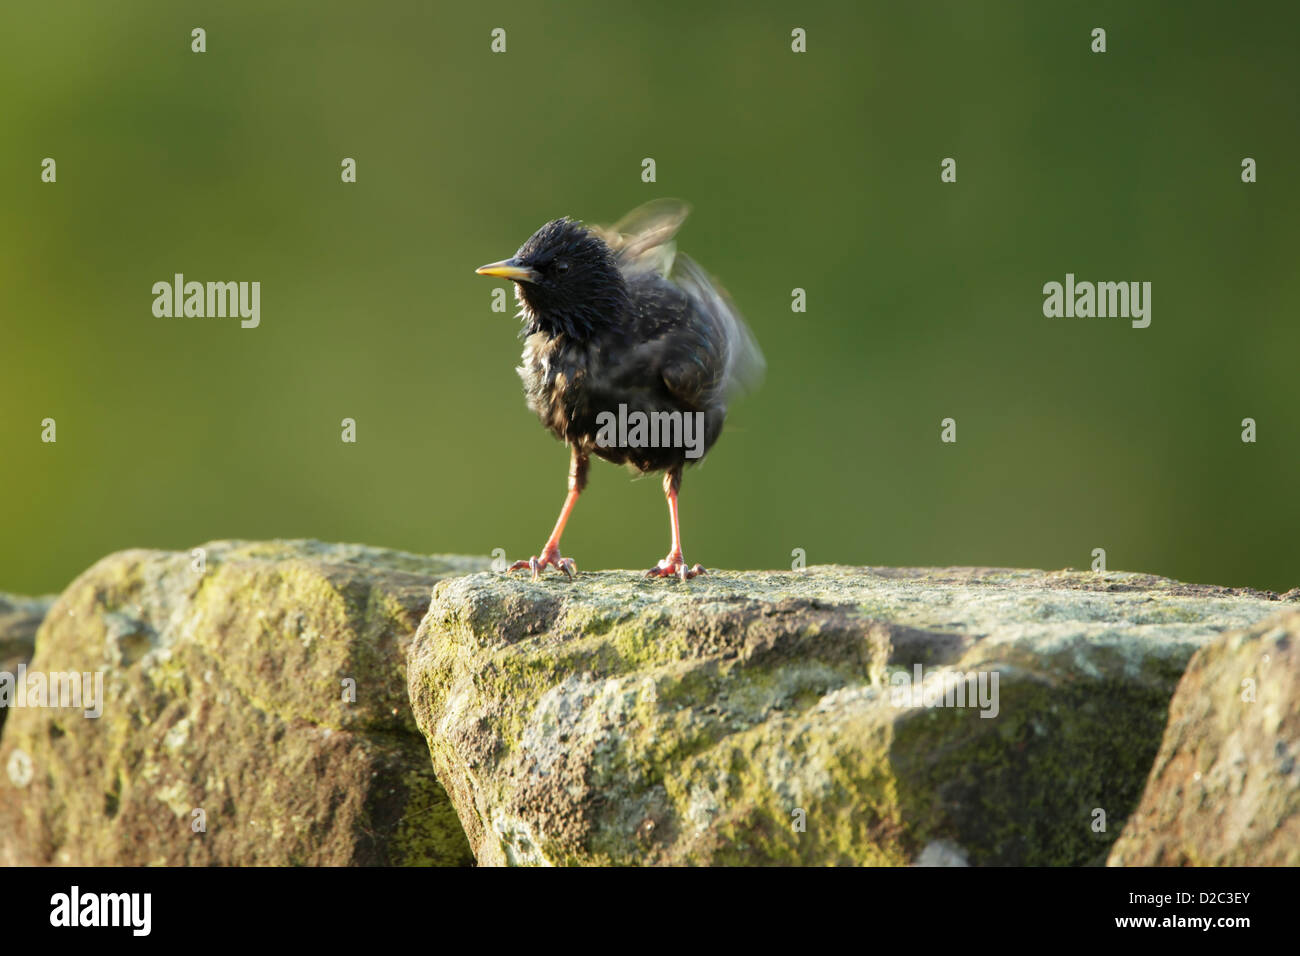 European starling (Sturnus vulagris) standing on a drystone wall and shaking its feathers Stock Photo